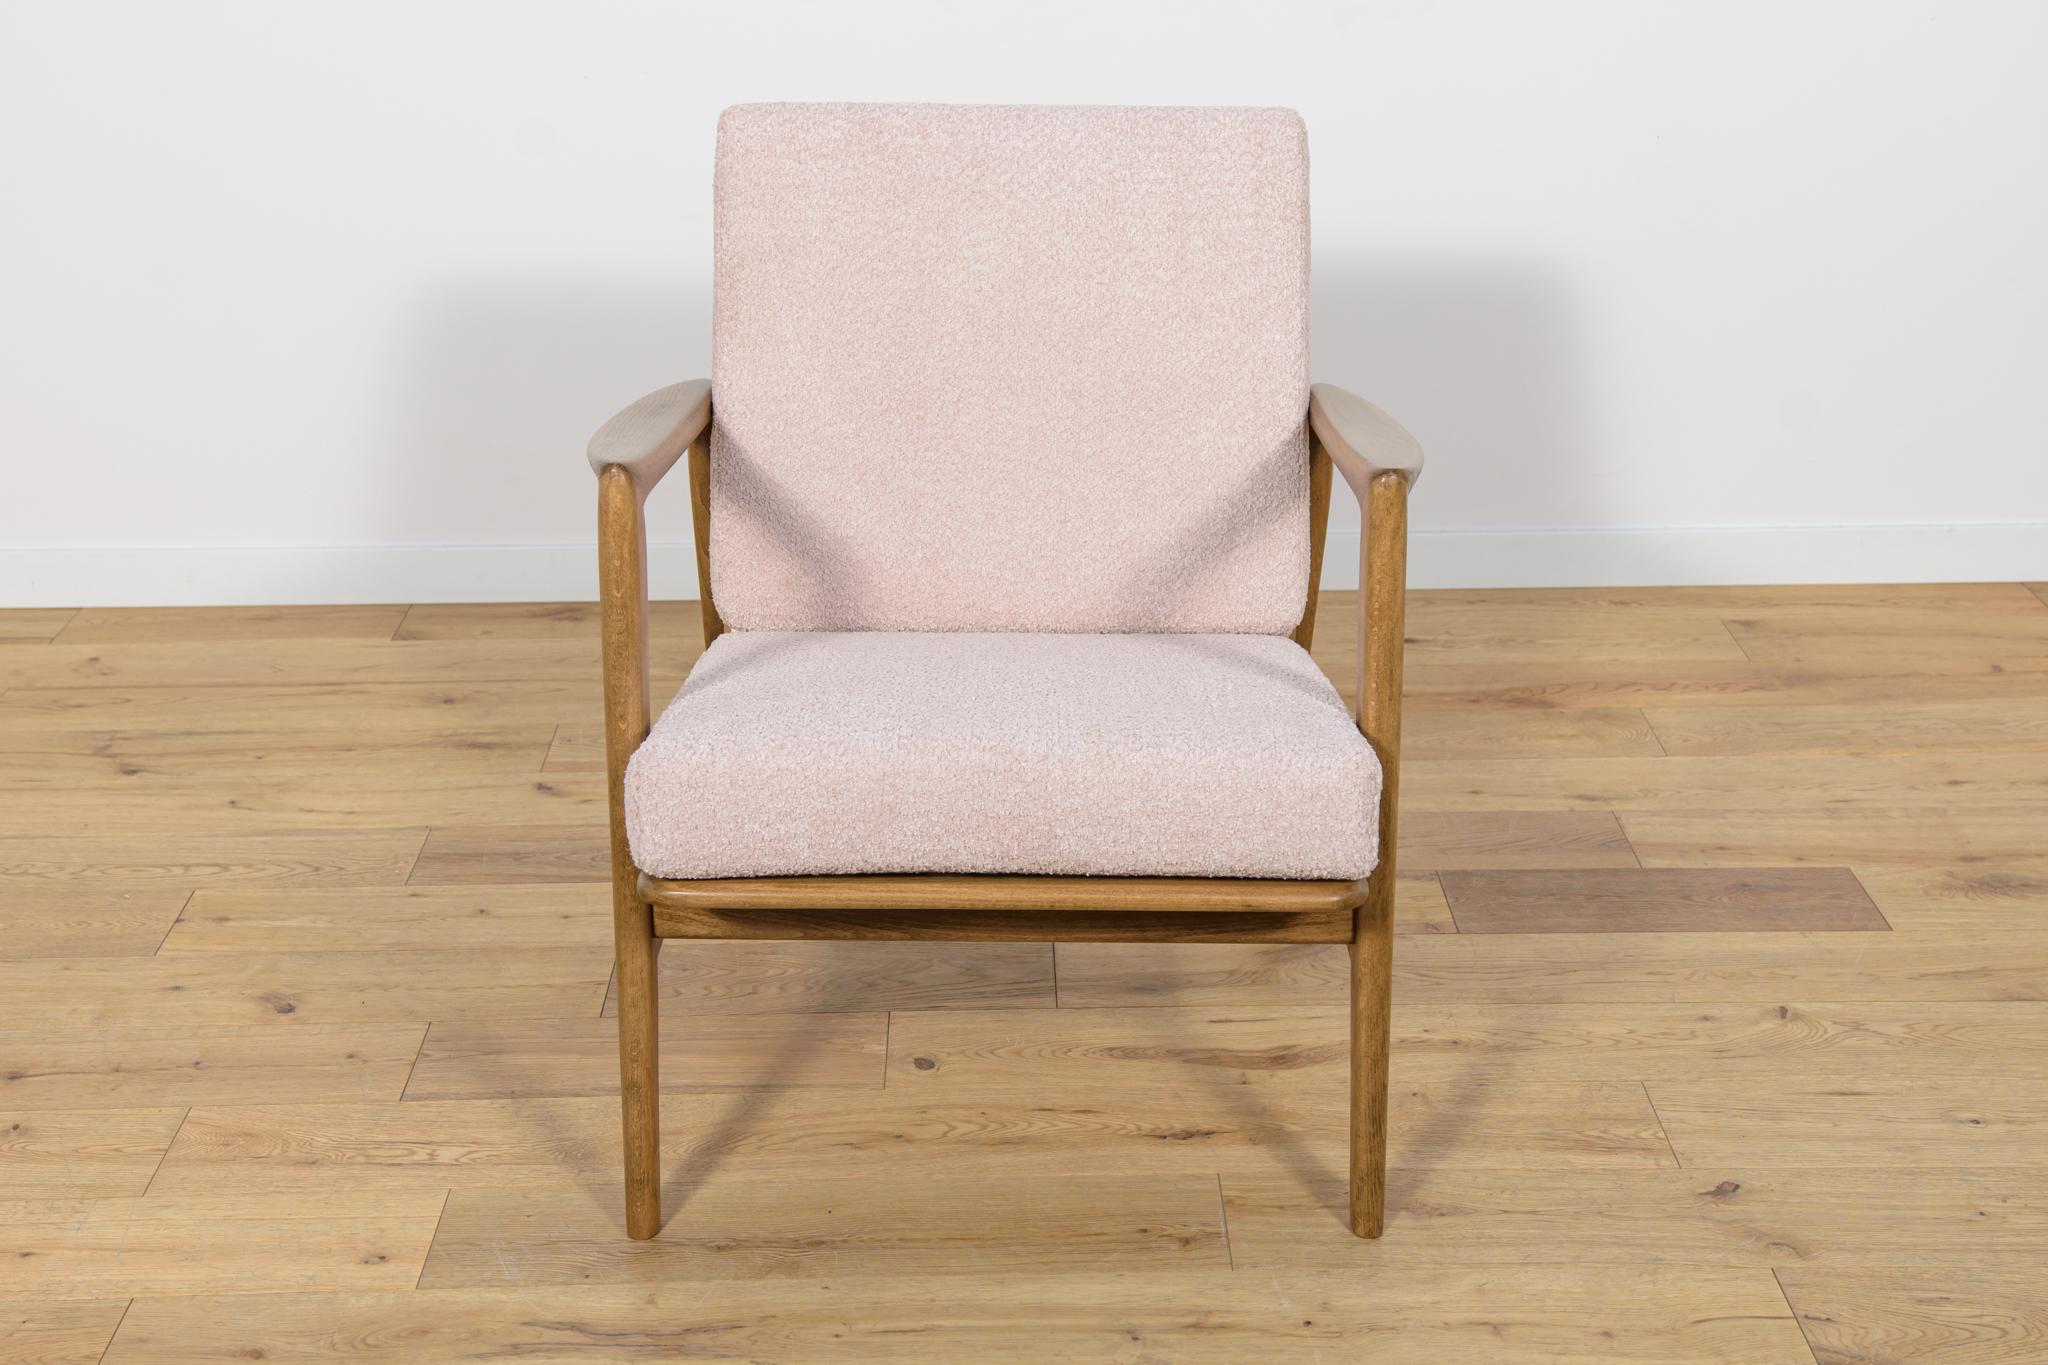 
The armchair was produced by the Polish company Swarzędzka Furniture Factory in 60s. Comfortable armchair with a unique form. Cushions replaced with new ones, upholstered in high-quality boucle typ fabric in a light pink color. The beech frame has